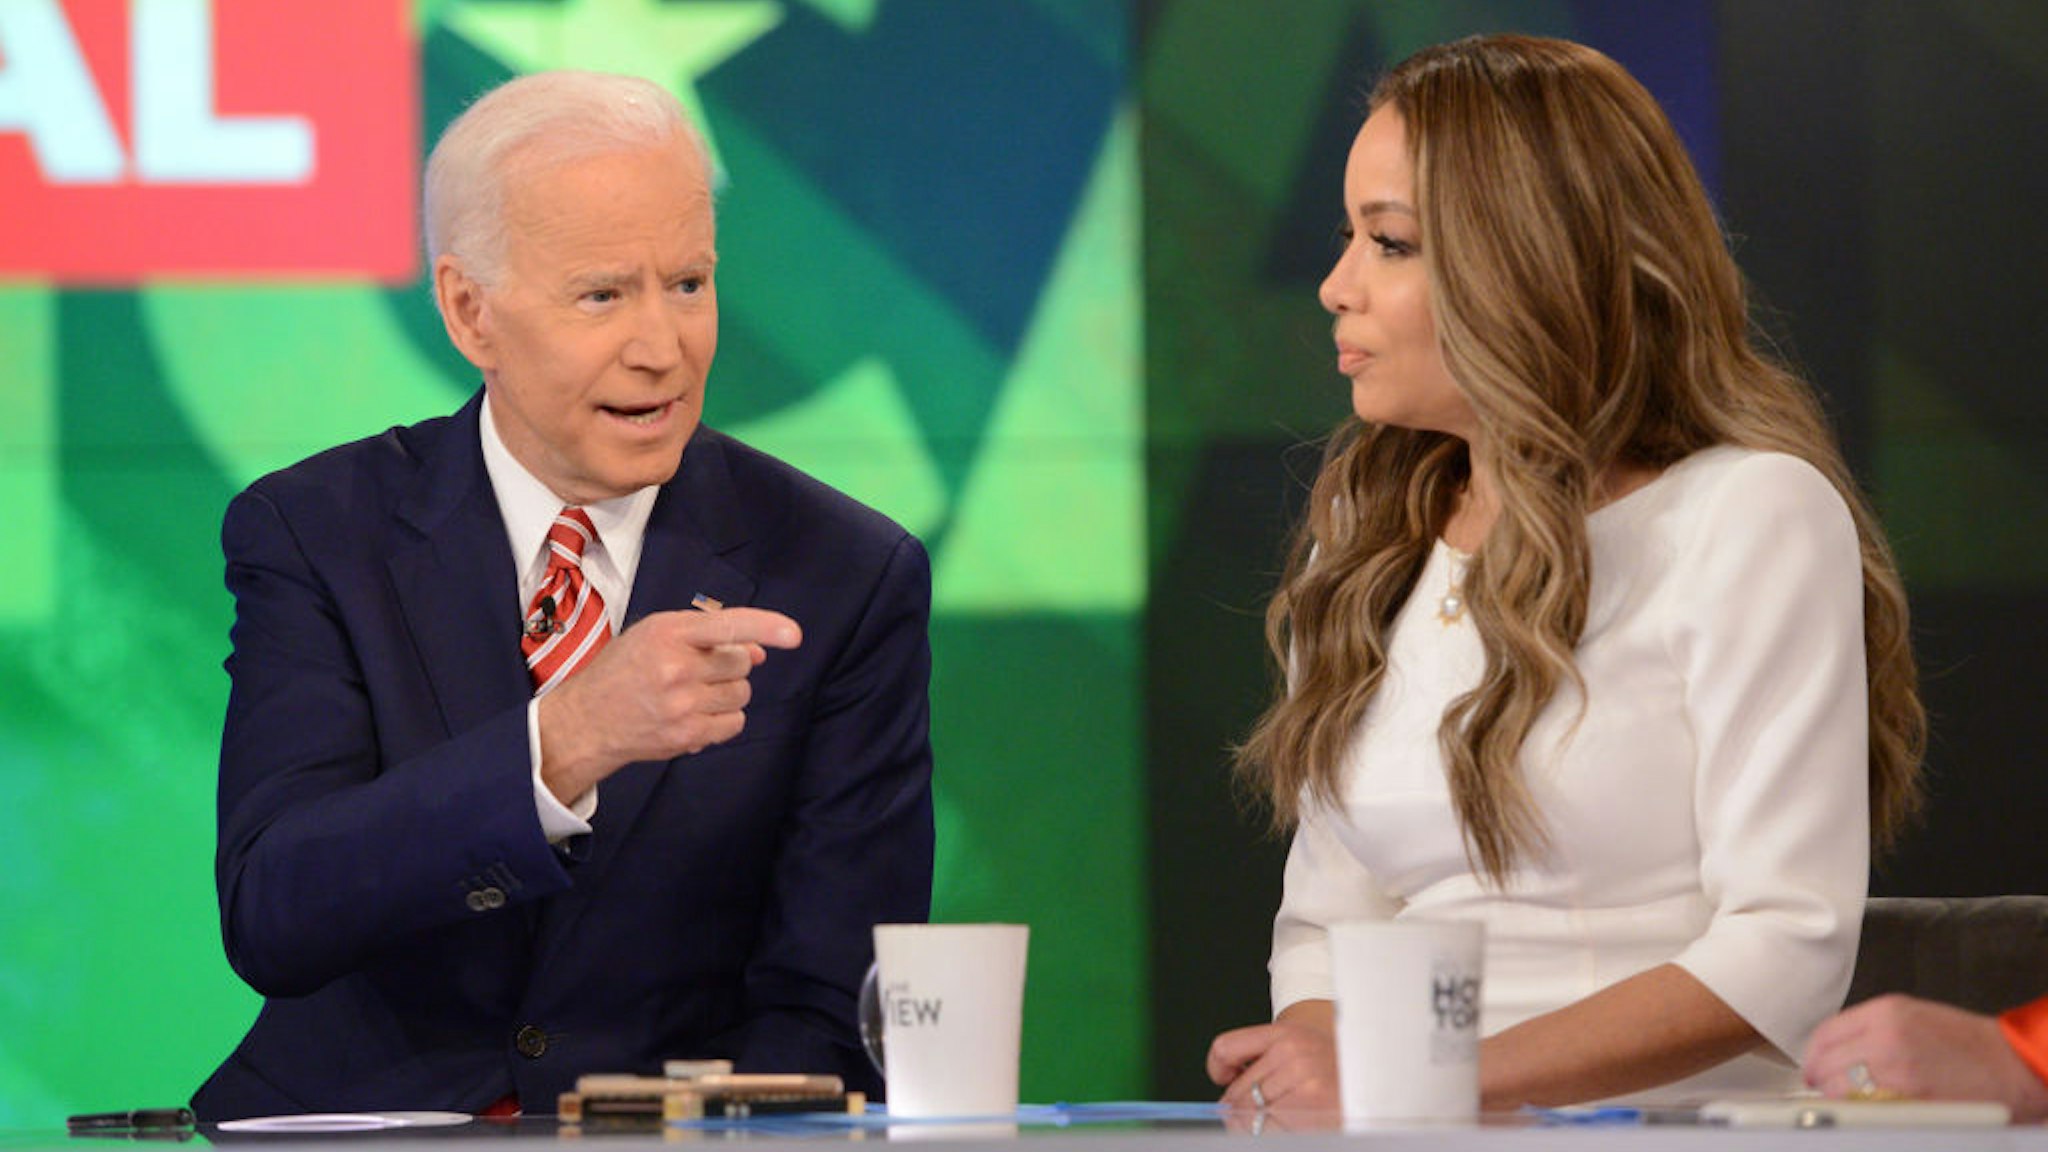 Joe Biden appears on Walt Disney Television via Getty Images's "The View" today, Friday, April 26, 2019.